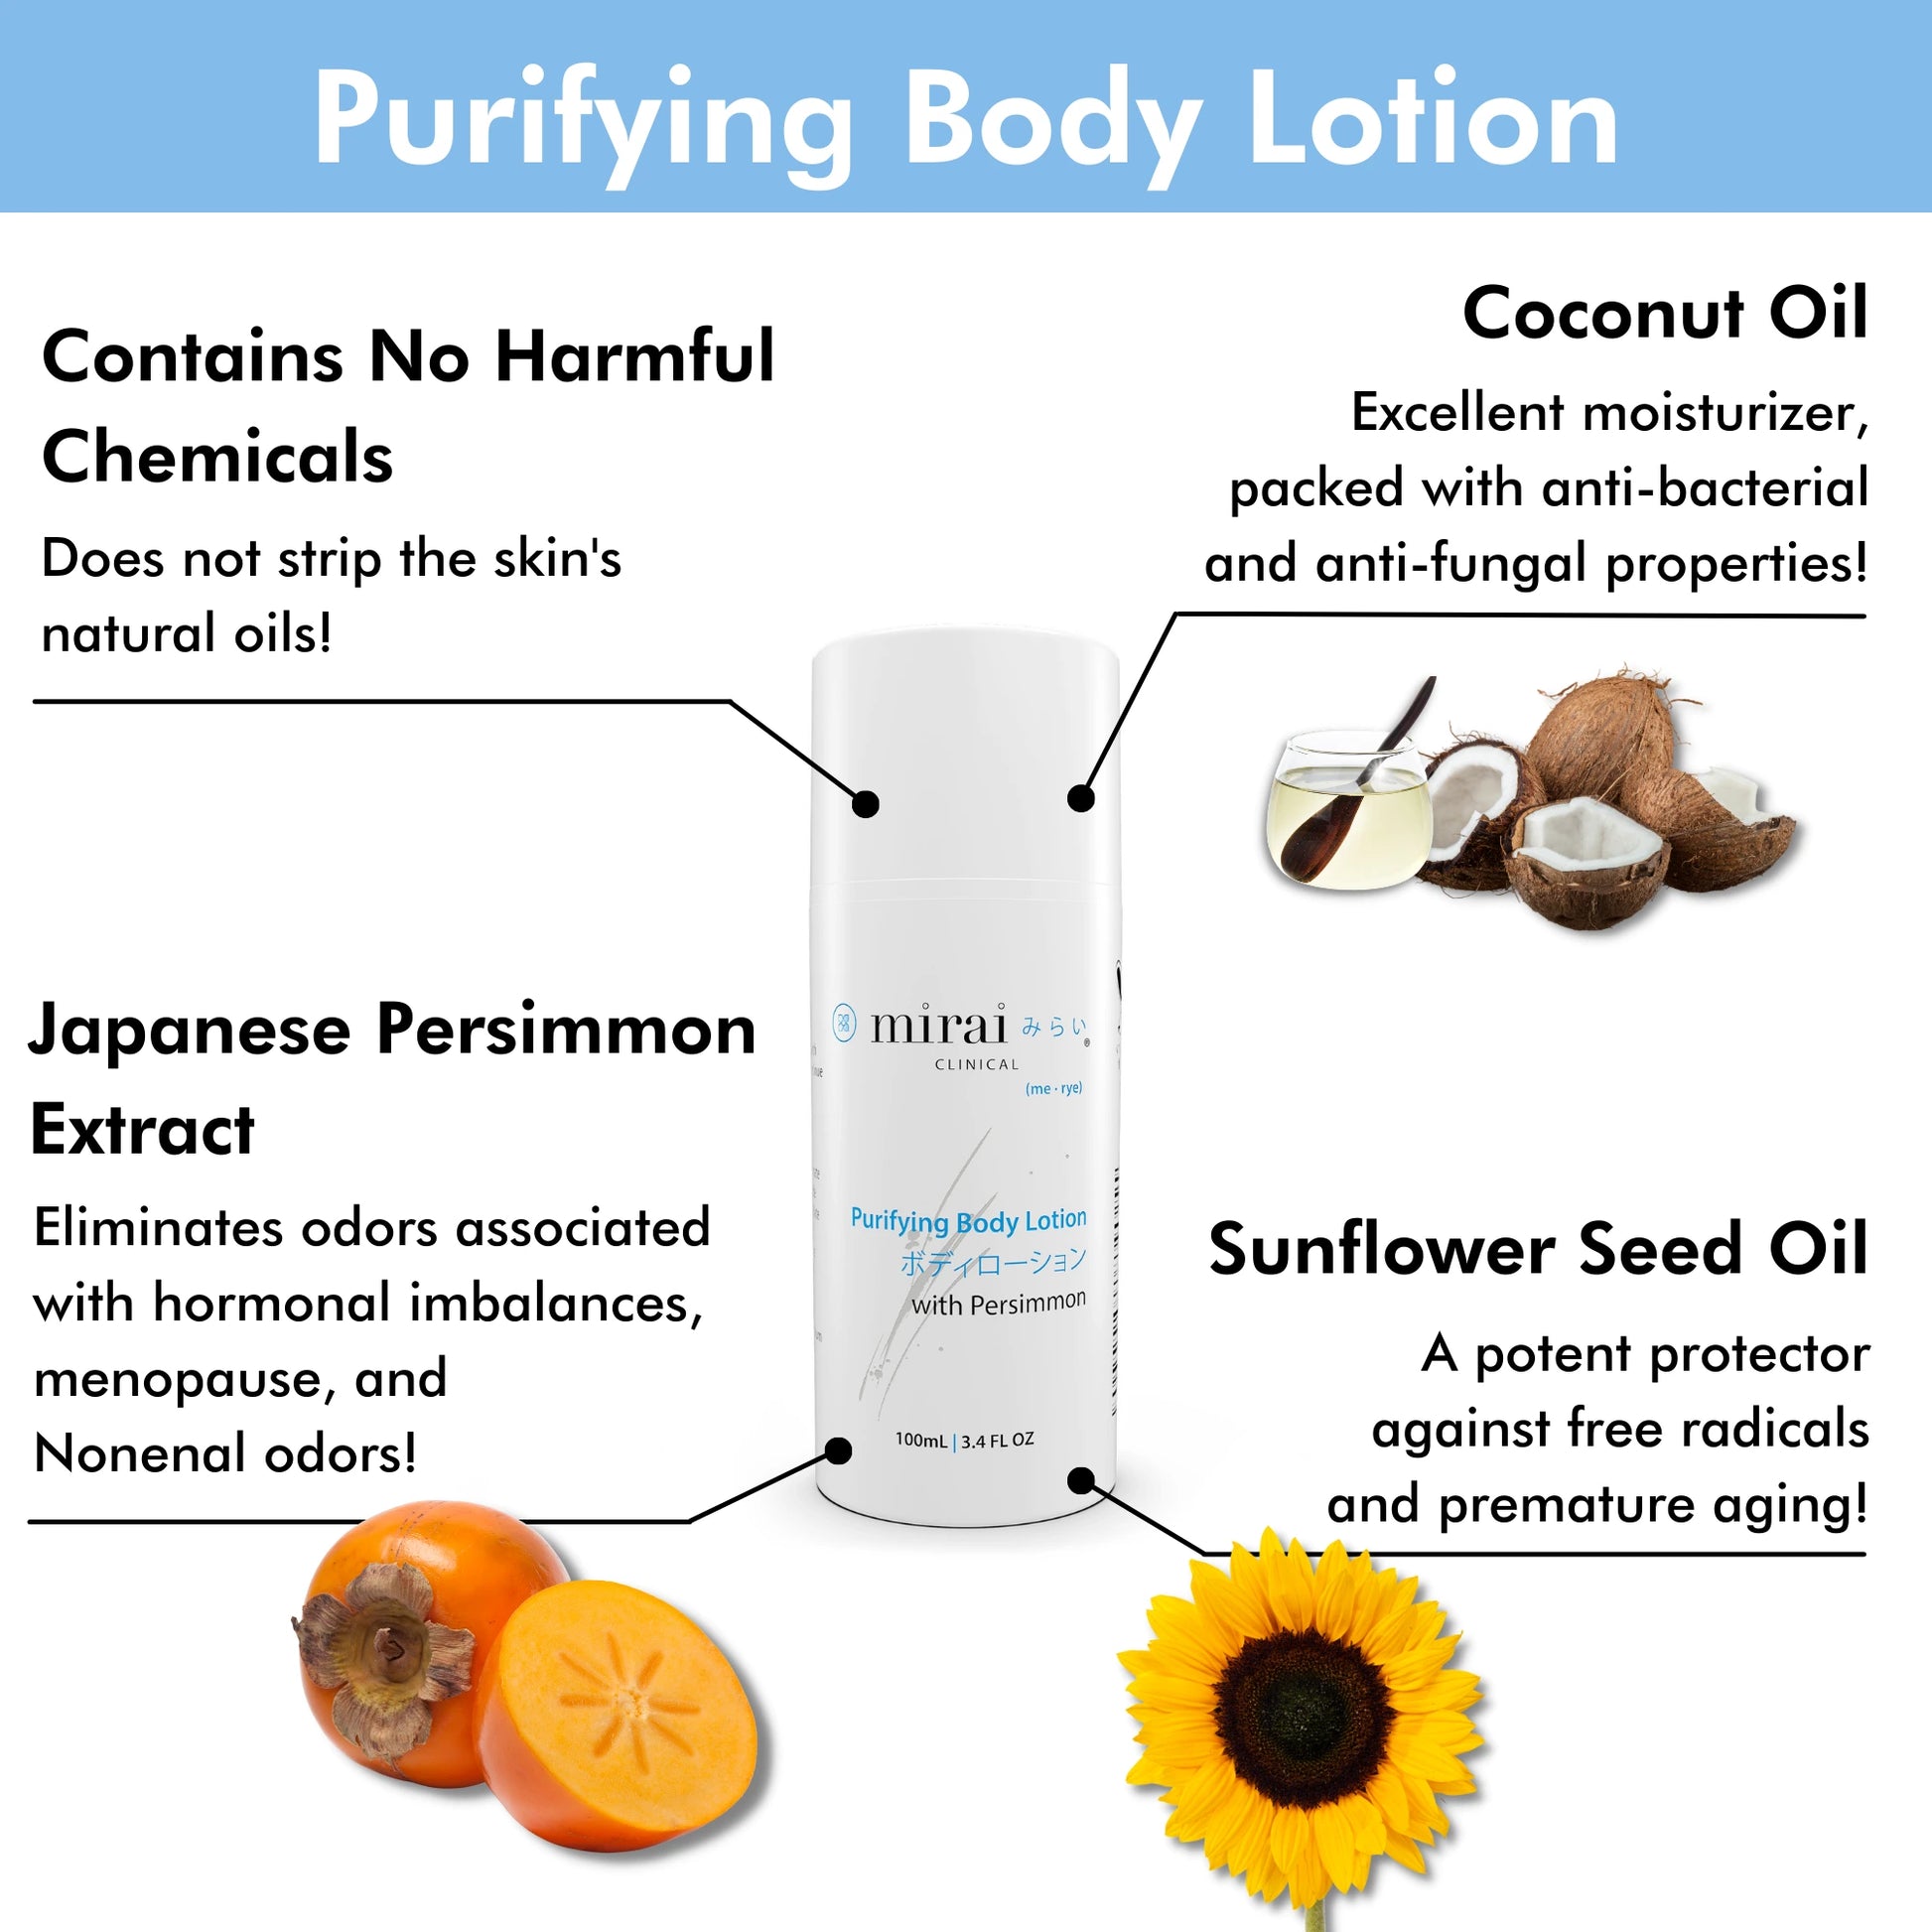 Mirai Clinical's Purifying Body Lotion bottle, enriched with the natural benefits of persimmon extract, designed to offer deep hydration and effectively combat nonenal body odor.